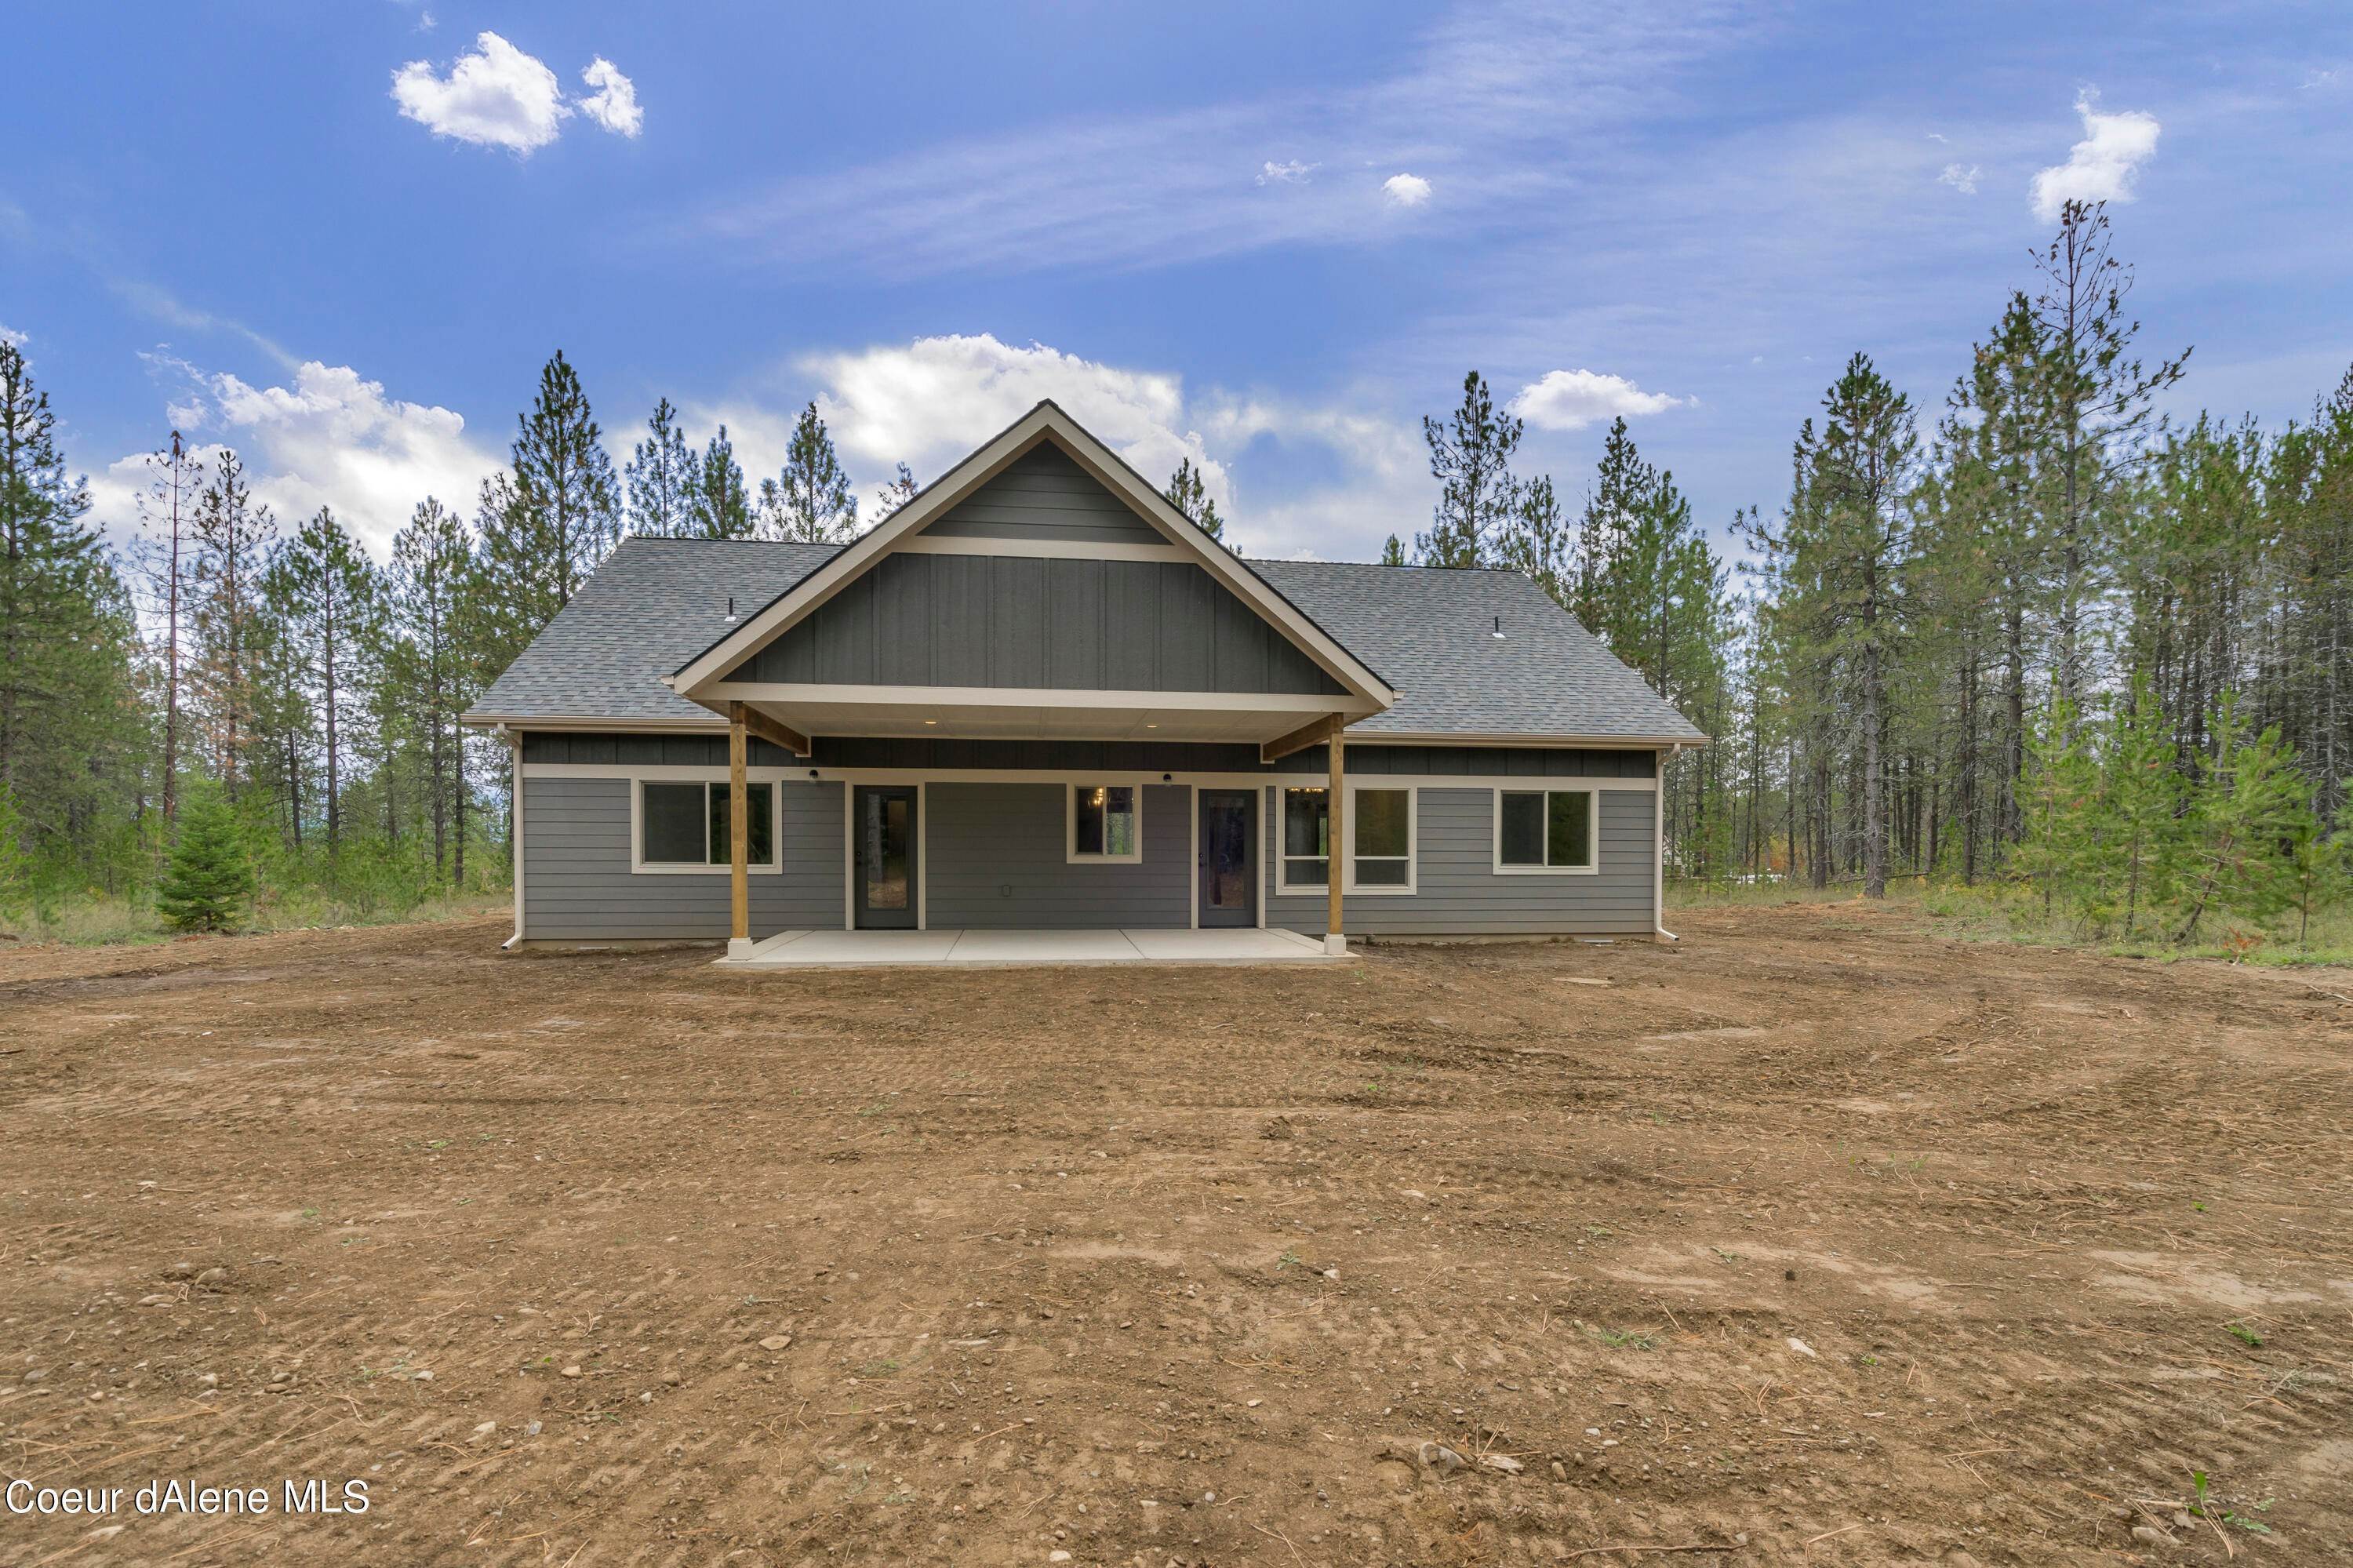 29. Single Family Homes for Sale at L11B1 N Eclipse Road Rathdrum, Idaho 83858 United States